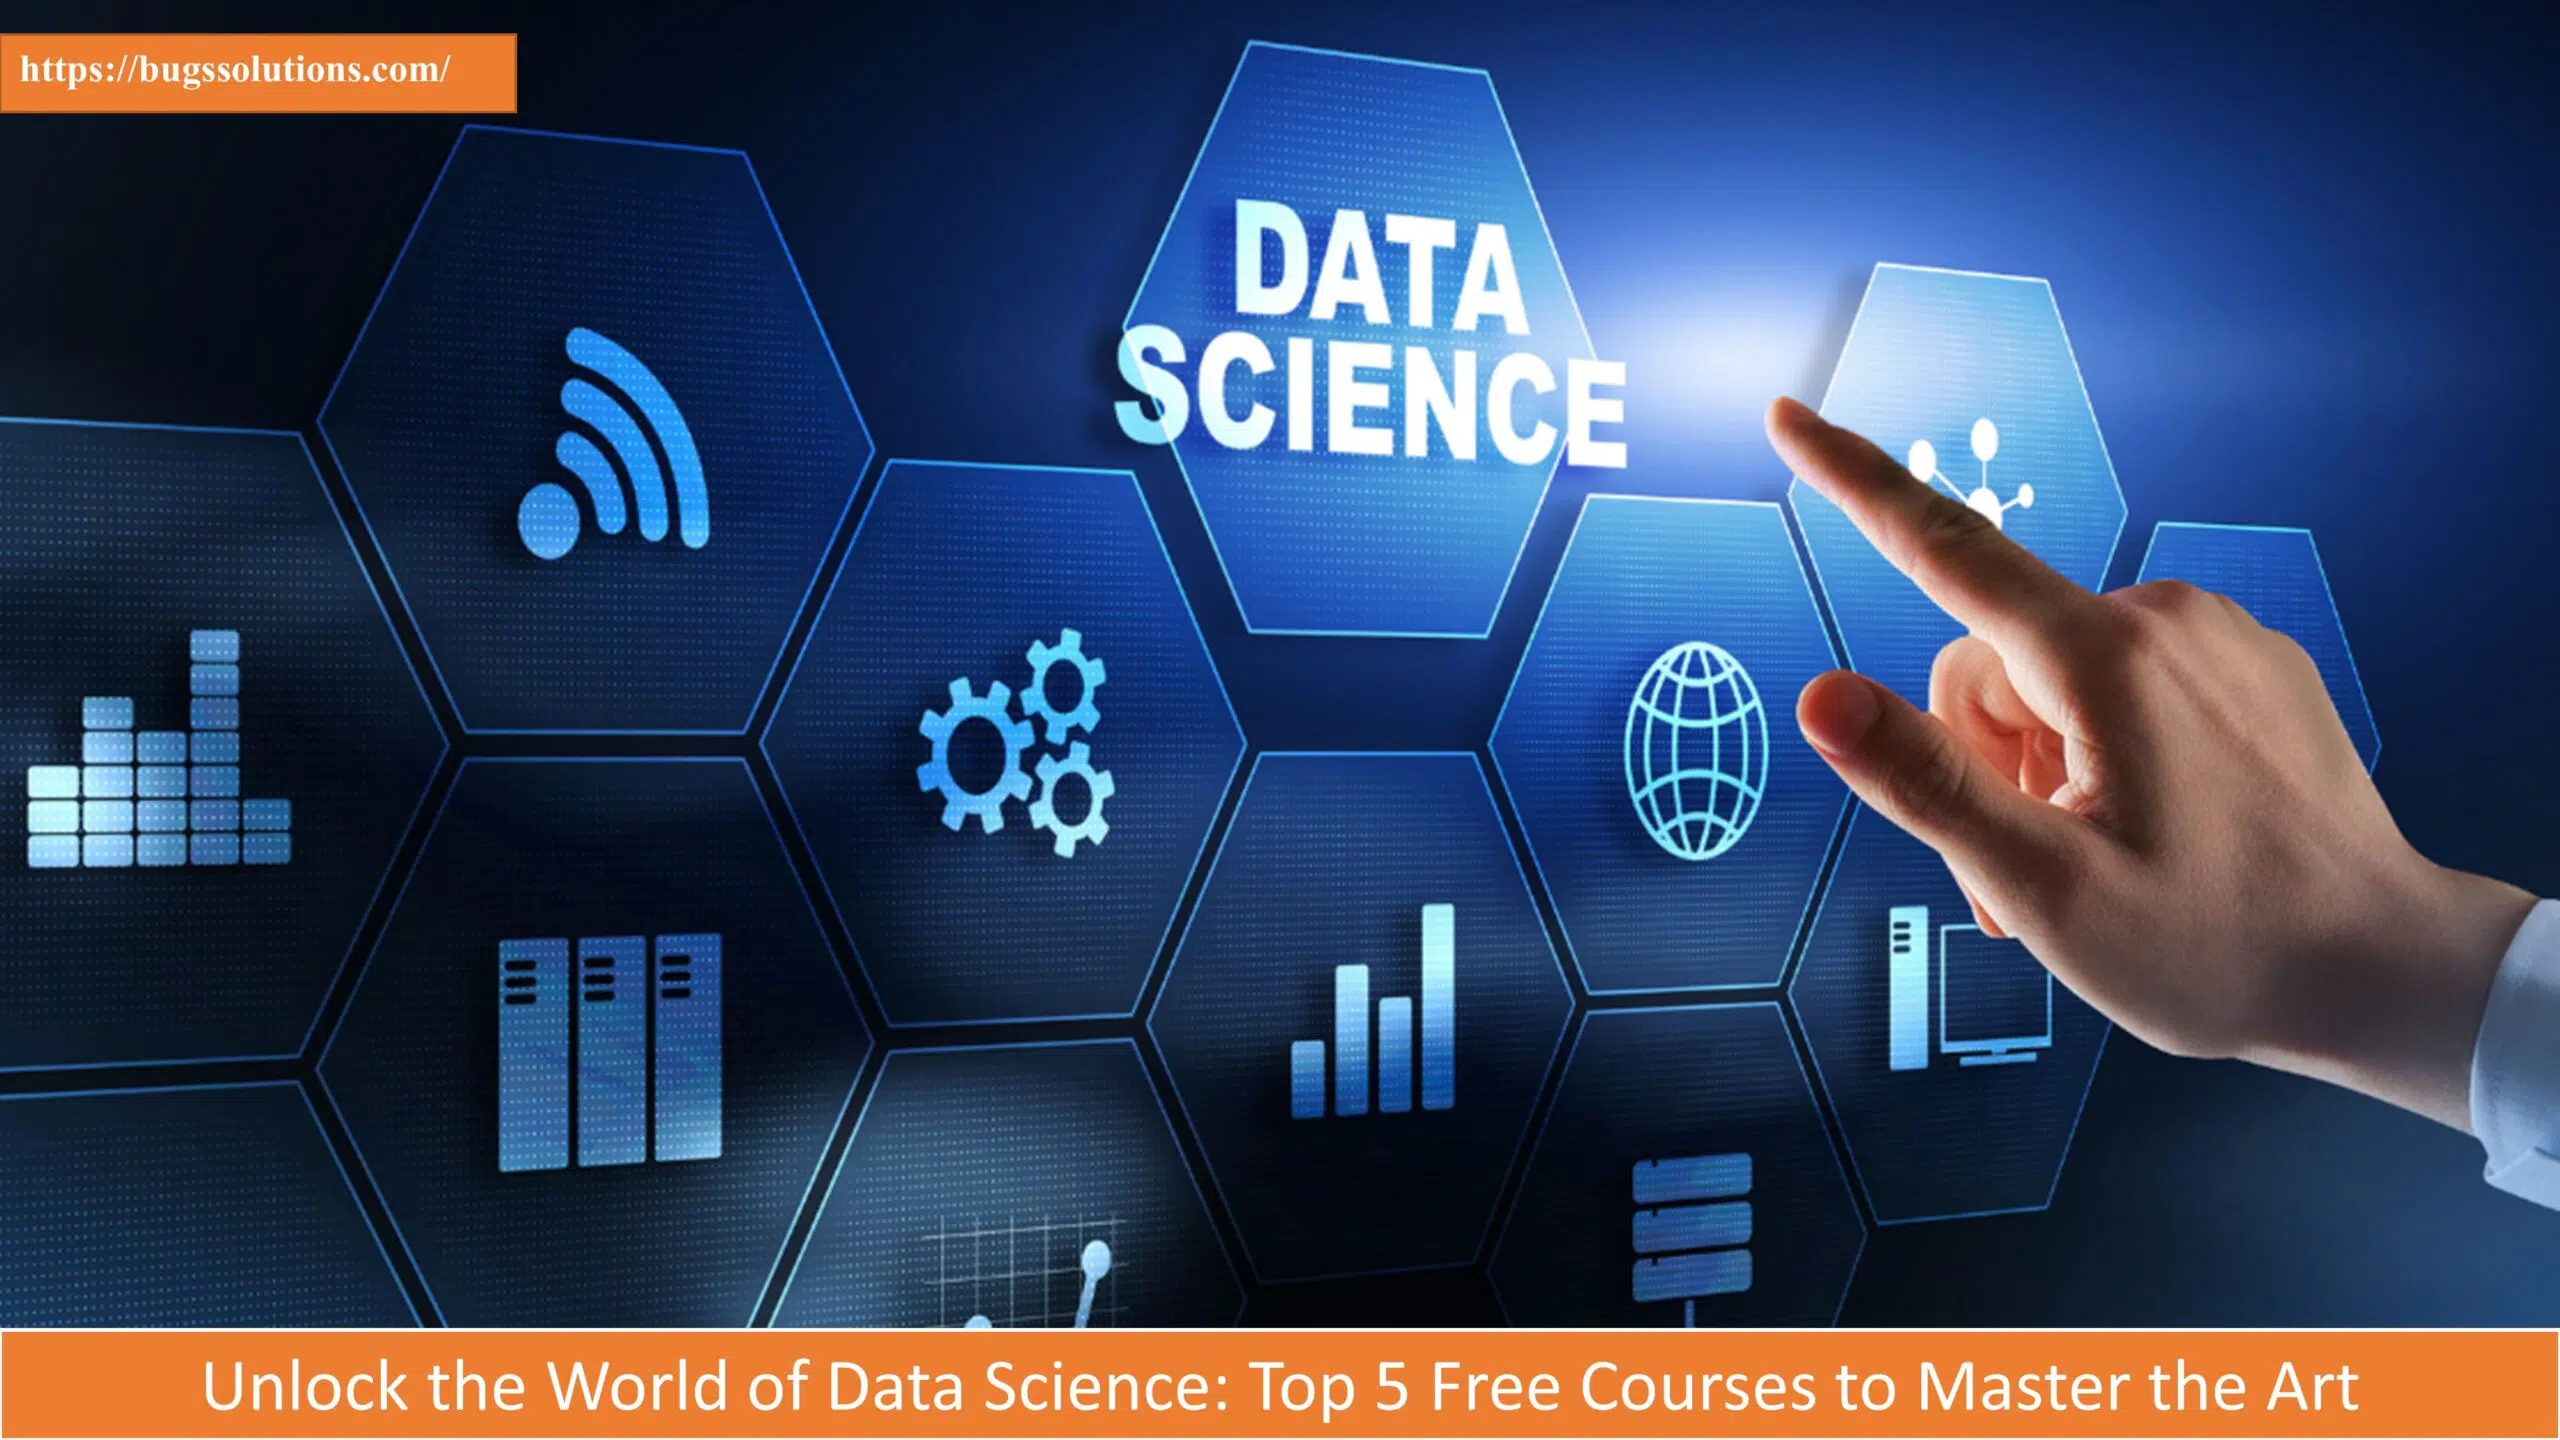 Unlock the World of Data Science: Top 5 Free Courses to Master the Art